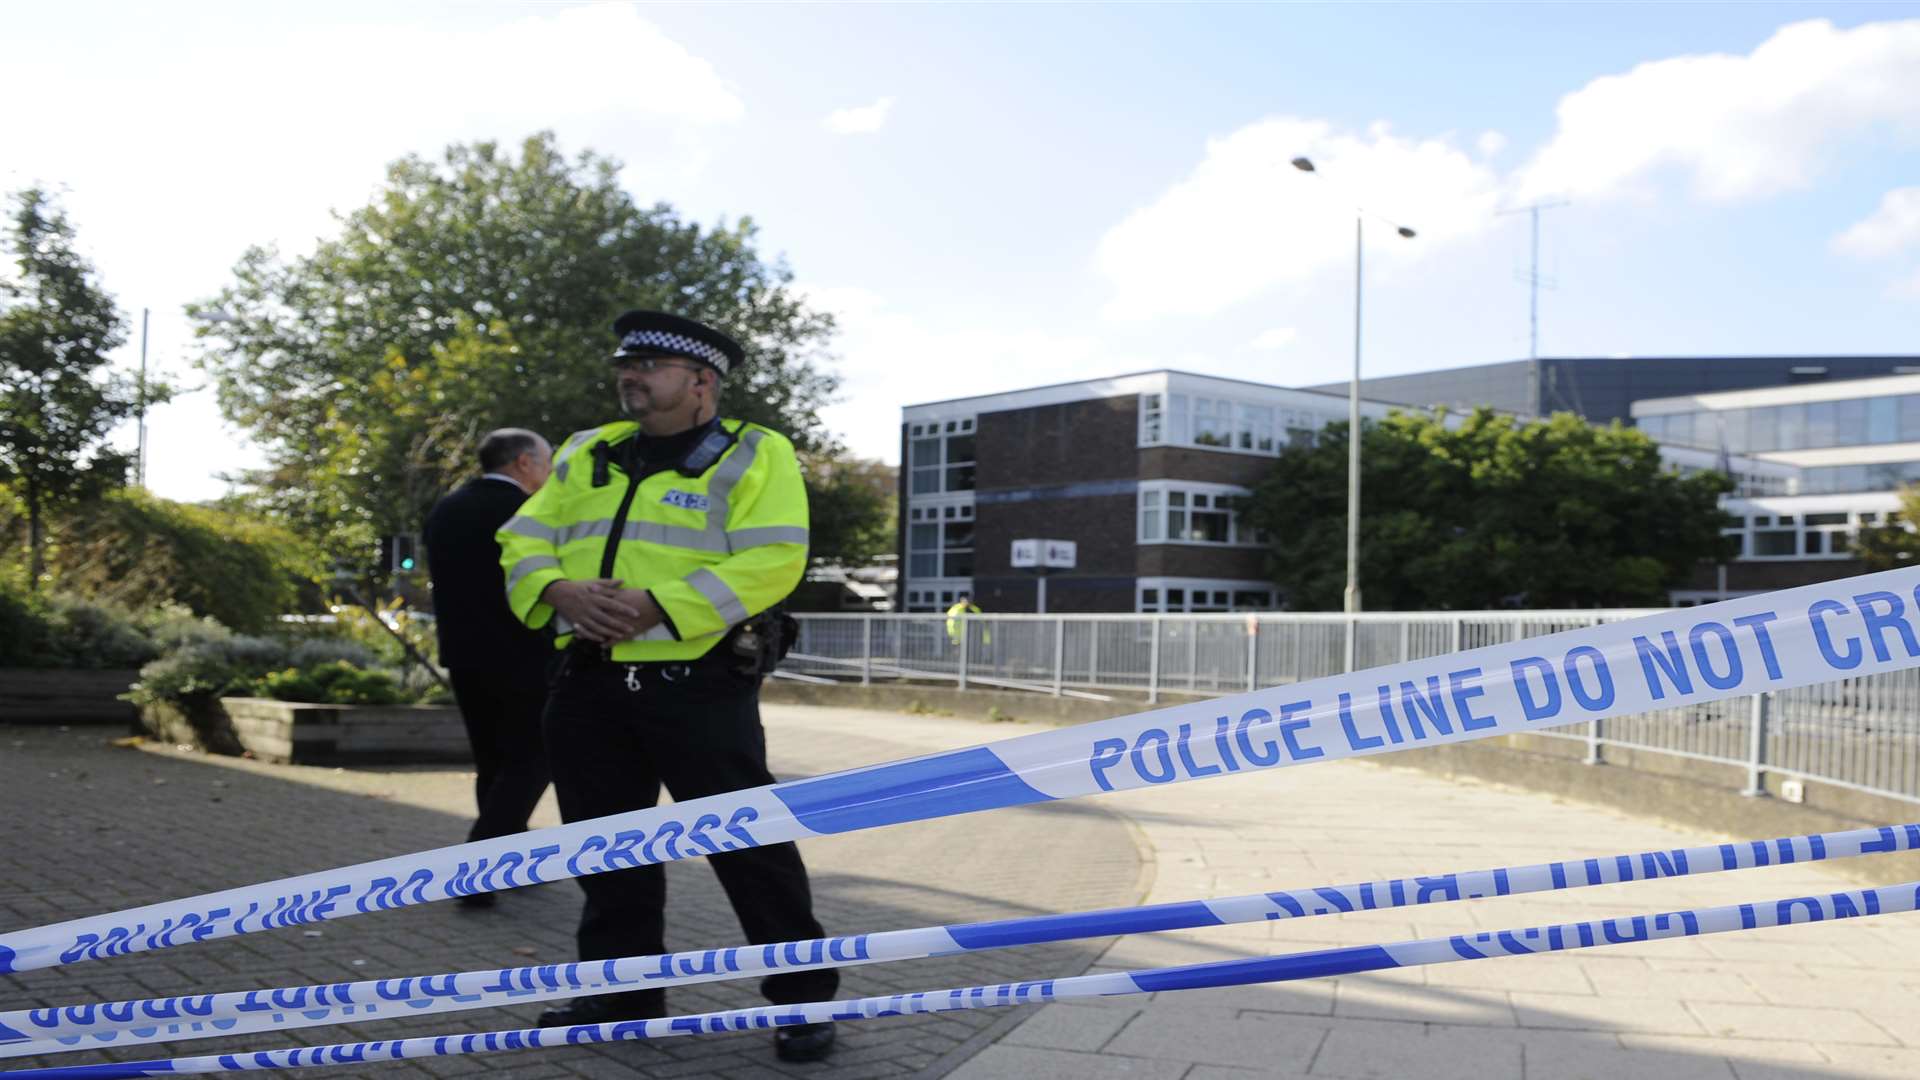 The police station was cordoned off for several hours